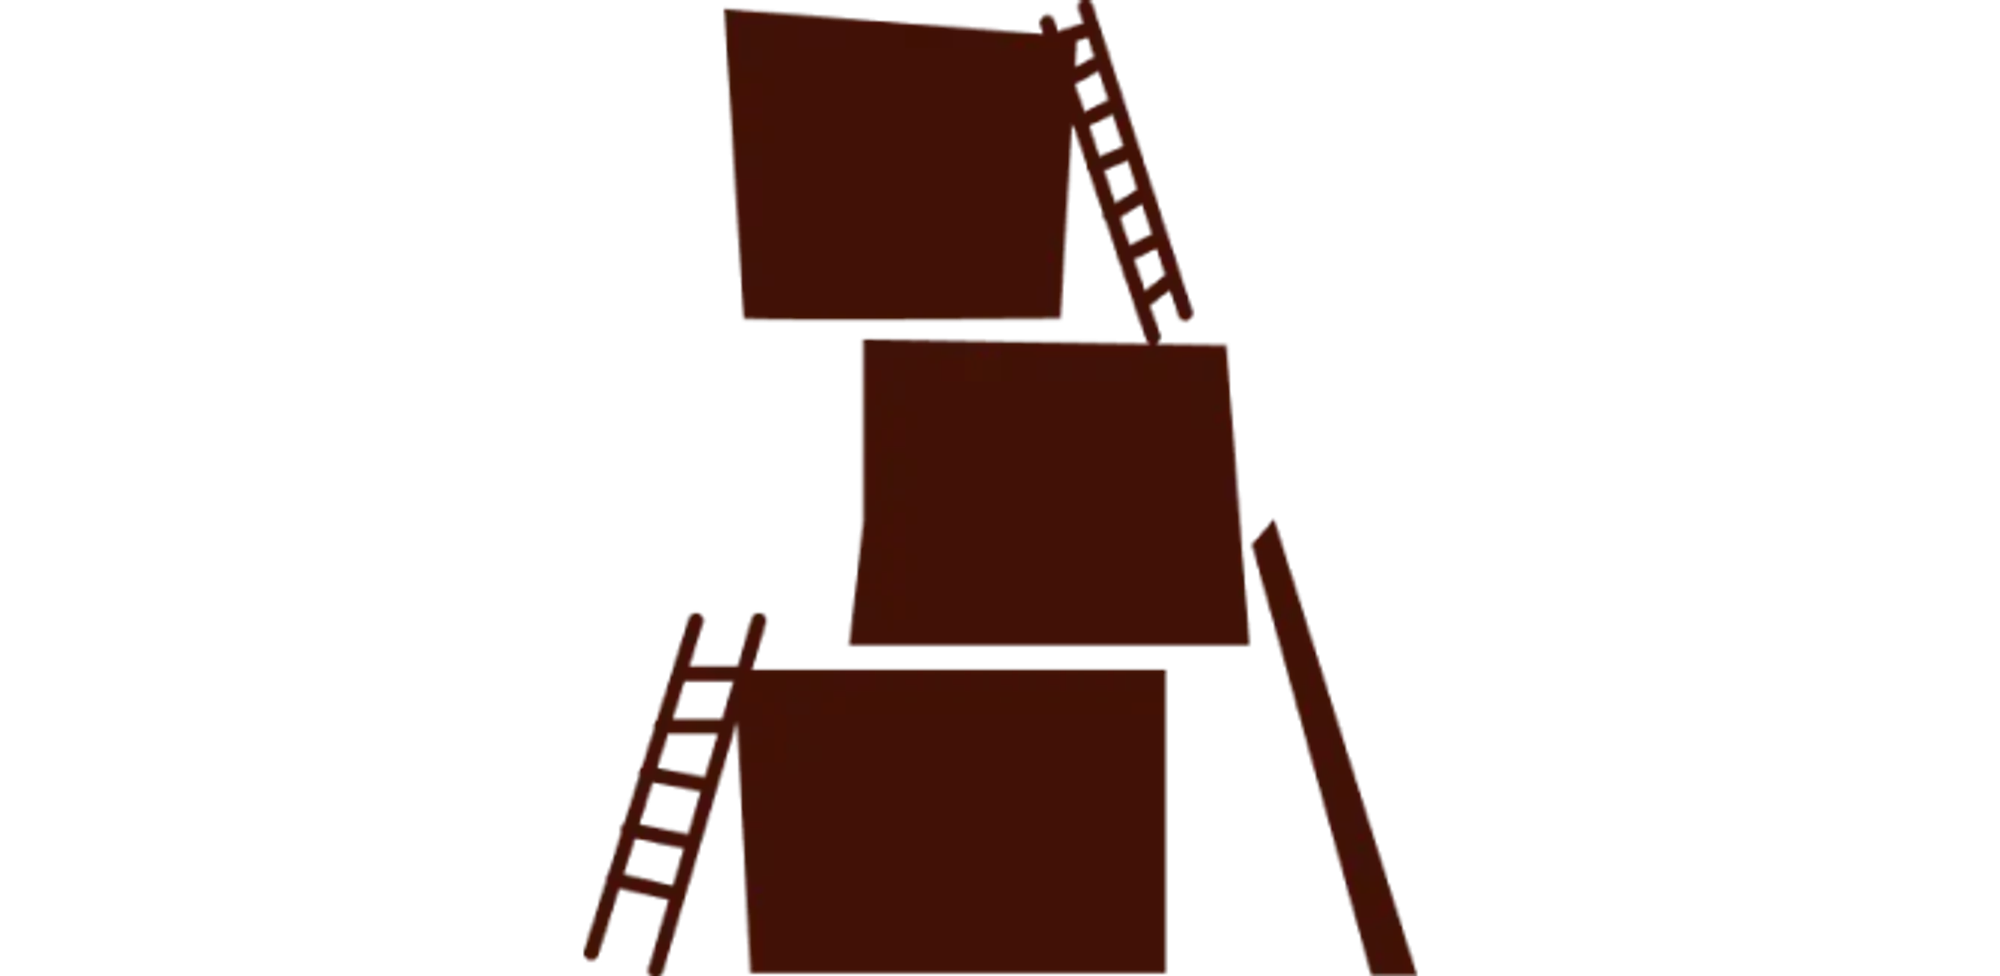 Illustration in abstract style of small beings constructing building with ladders